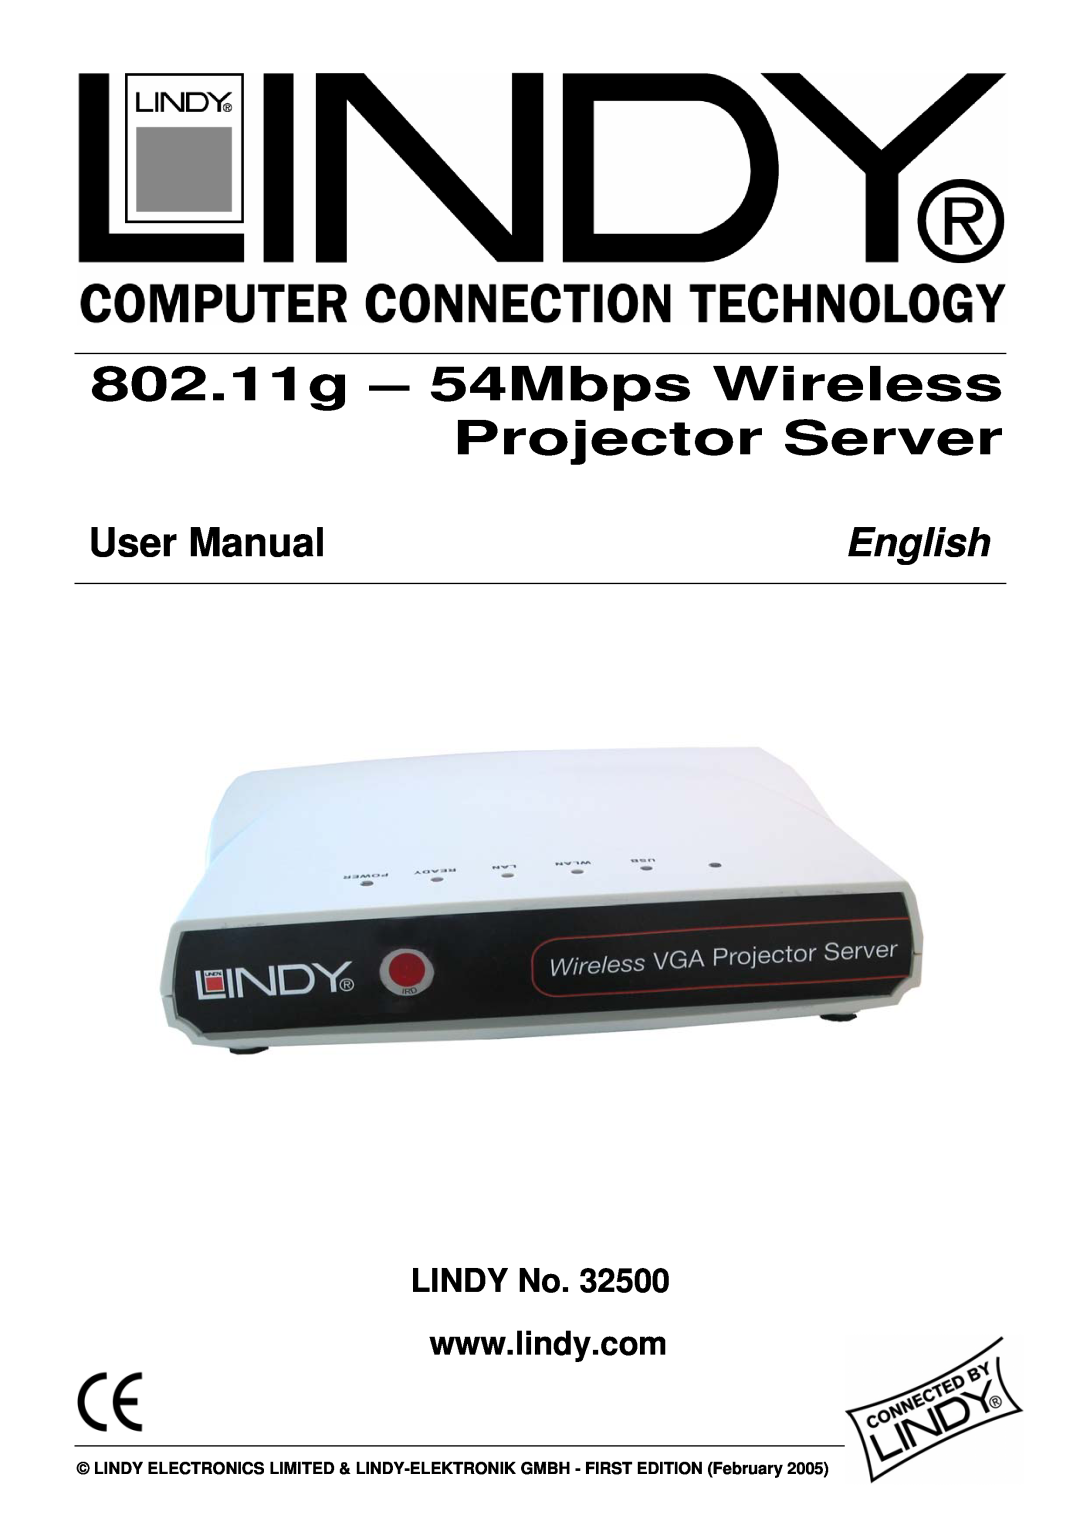 Lindy 32500 user manual LINDY No, 802.11g - 54Mbps Wireless Projector Server, English 